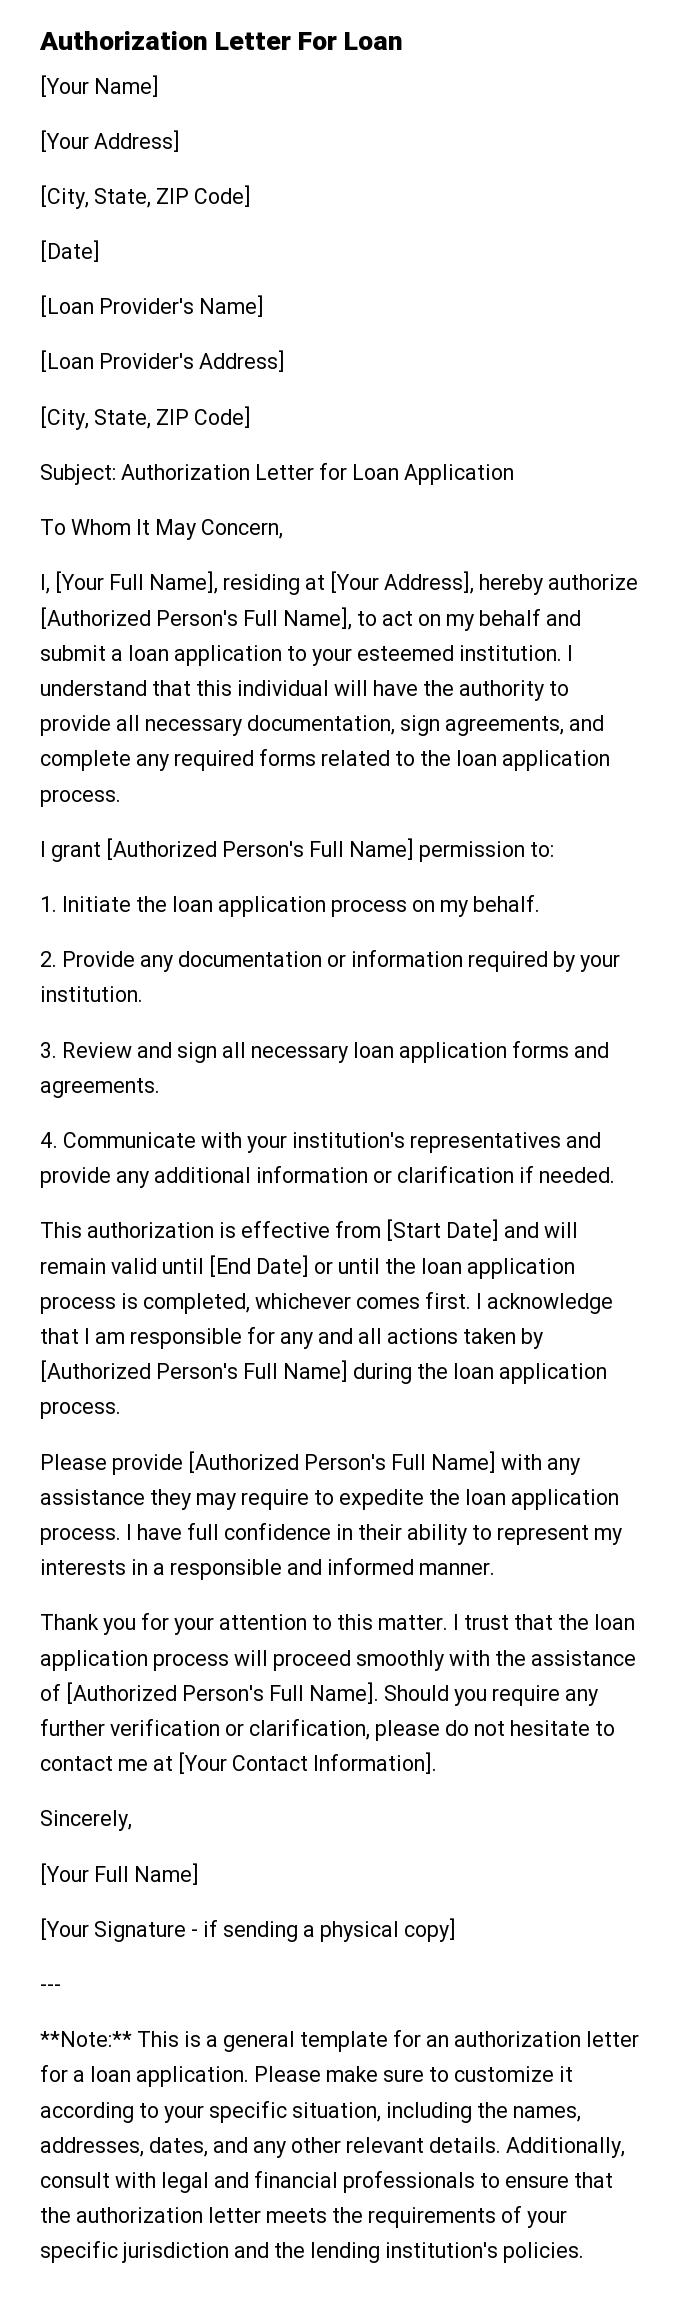 Authorization Letter For Loan